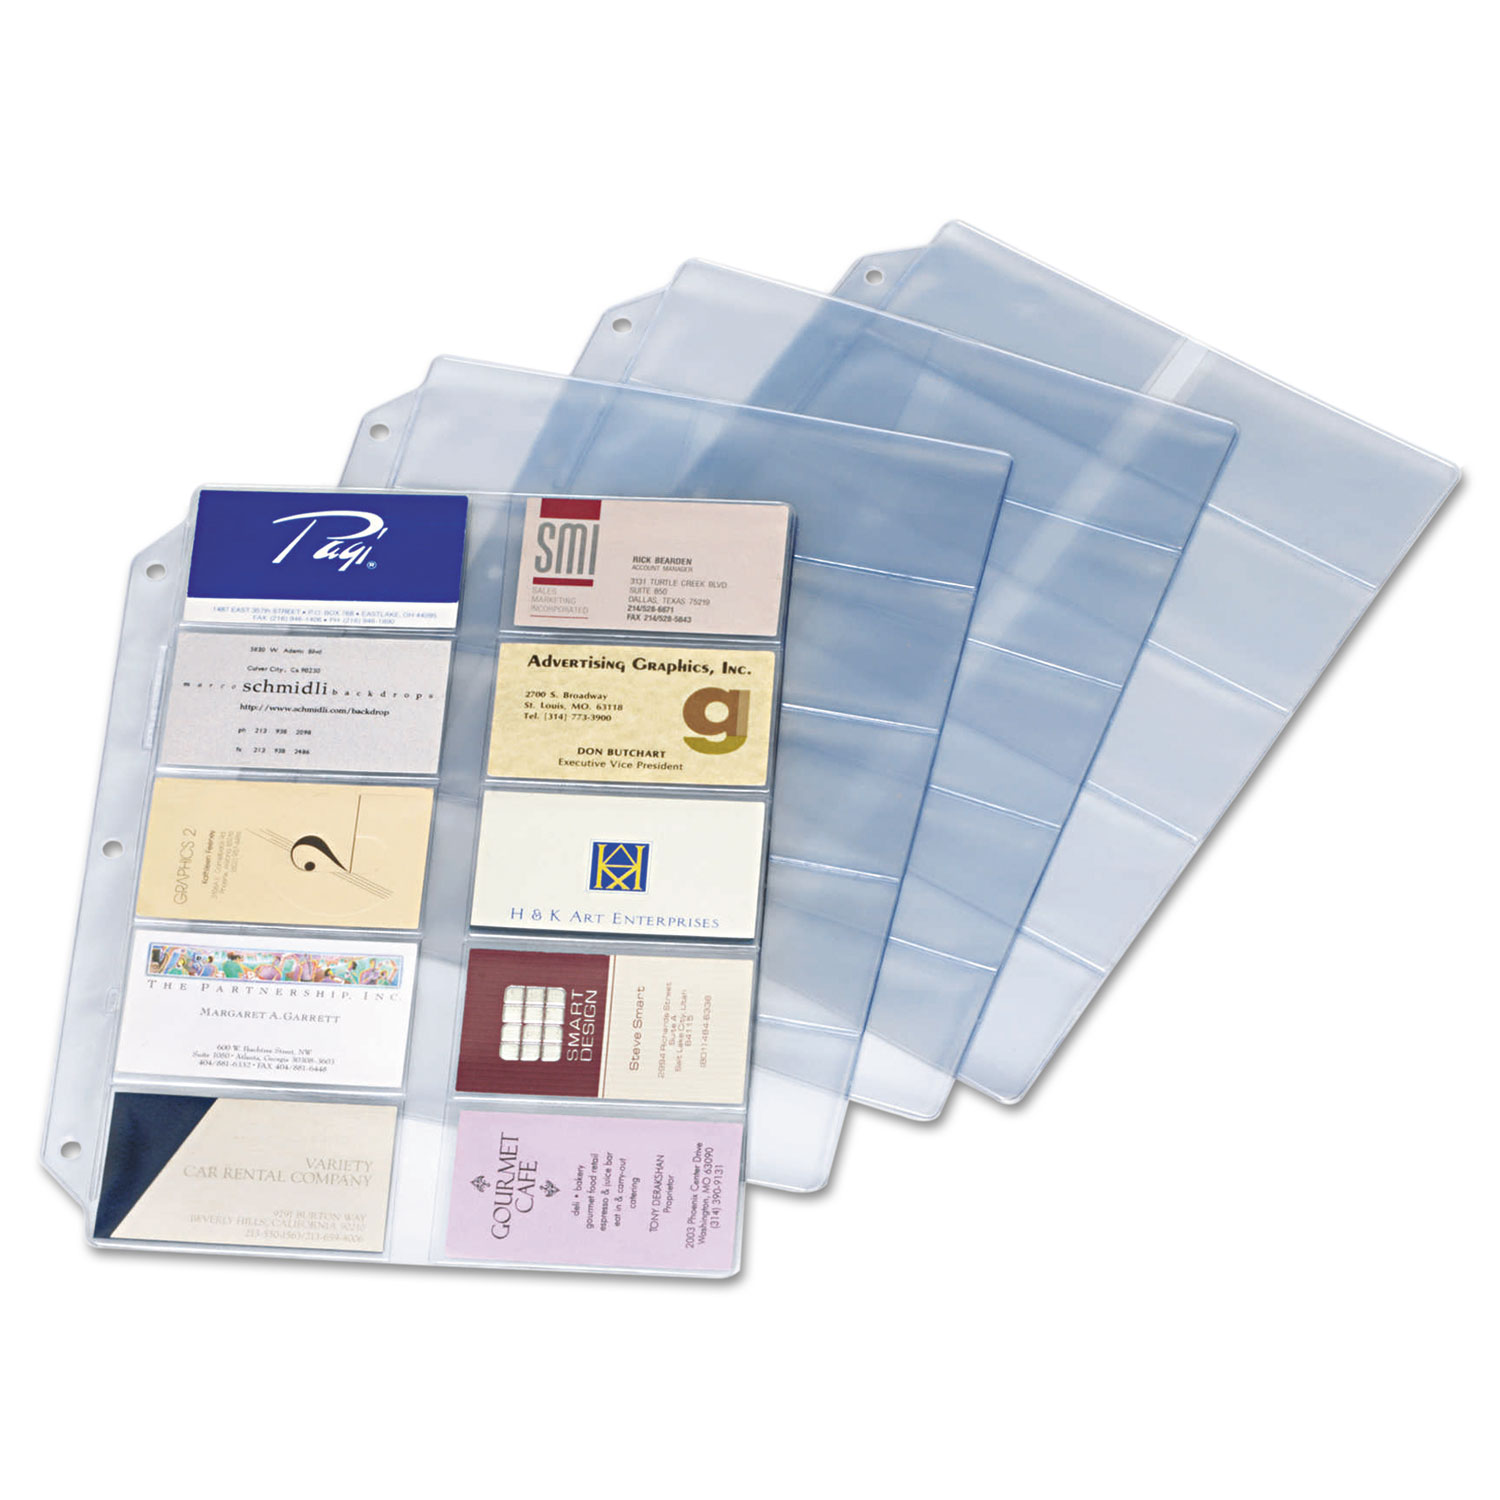  Cardinal 7856 000 Business Card Refill Pages, Holds 200 Cards, Clear, 20 Cards/Sheet, 10/Pack (CRD7856000) 